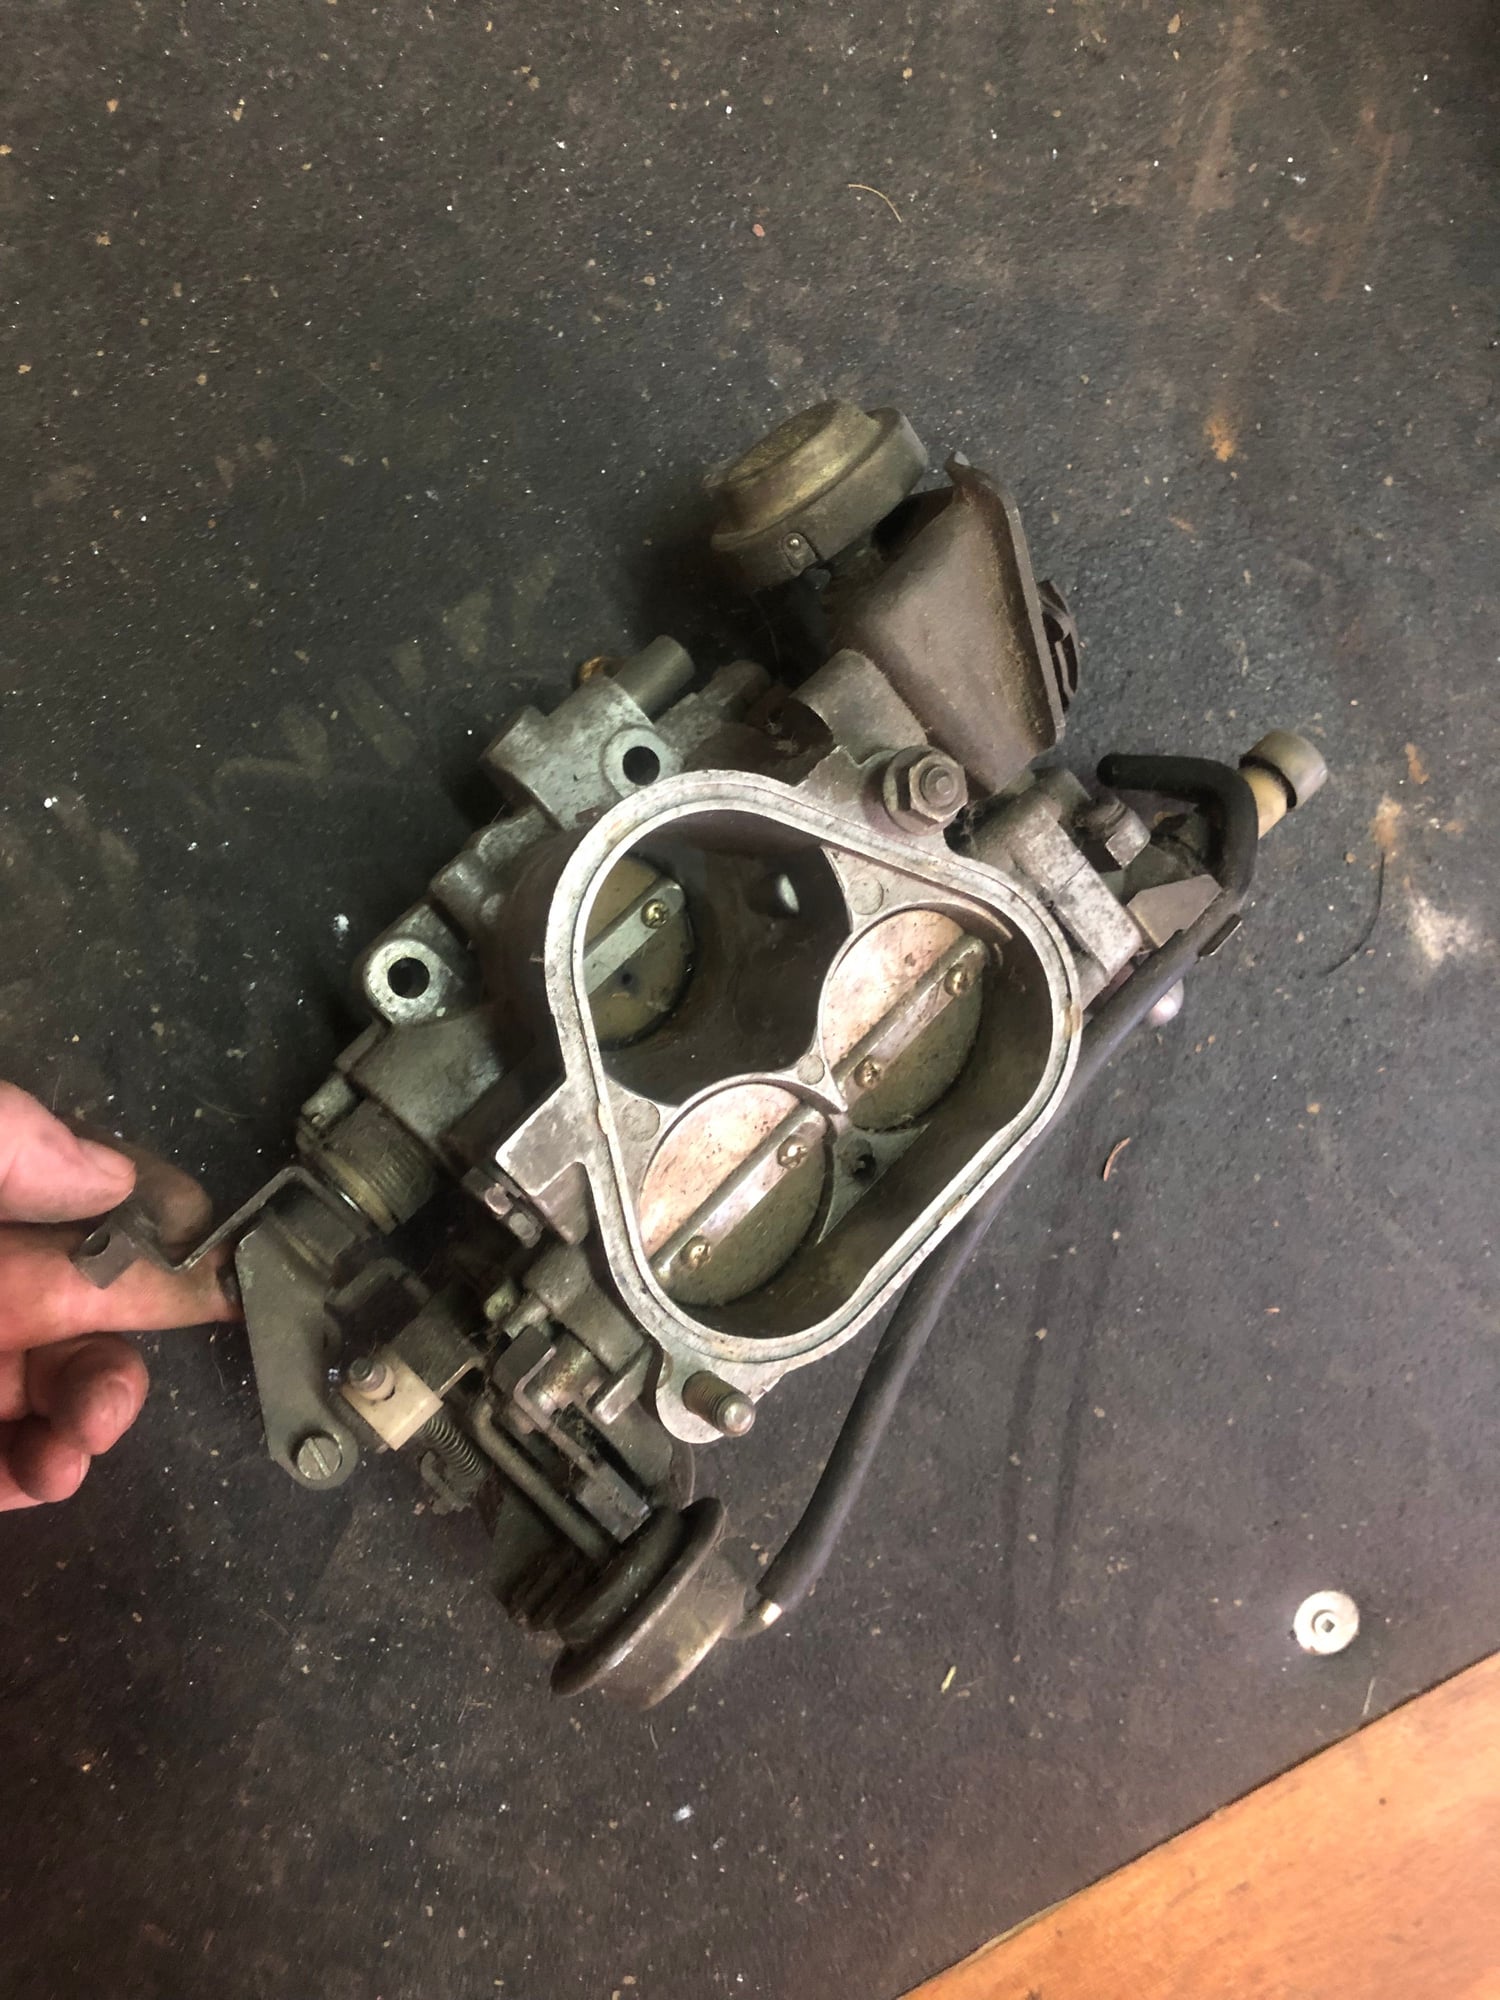 1988 Mazda RX-7 - Factory Turboii engine parts clear out - Engine - Complete - $123 - Moncton, NB E1E2G3, Canada